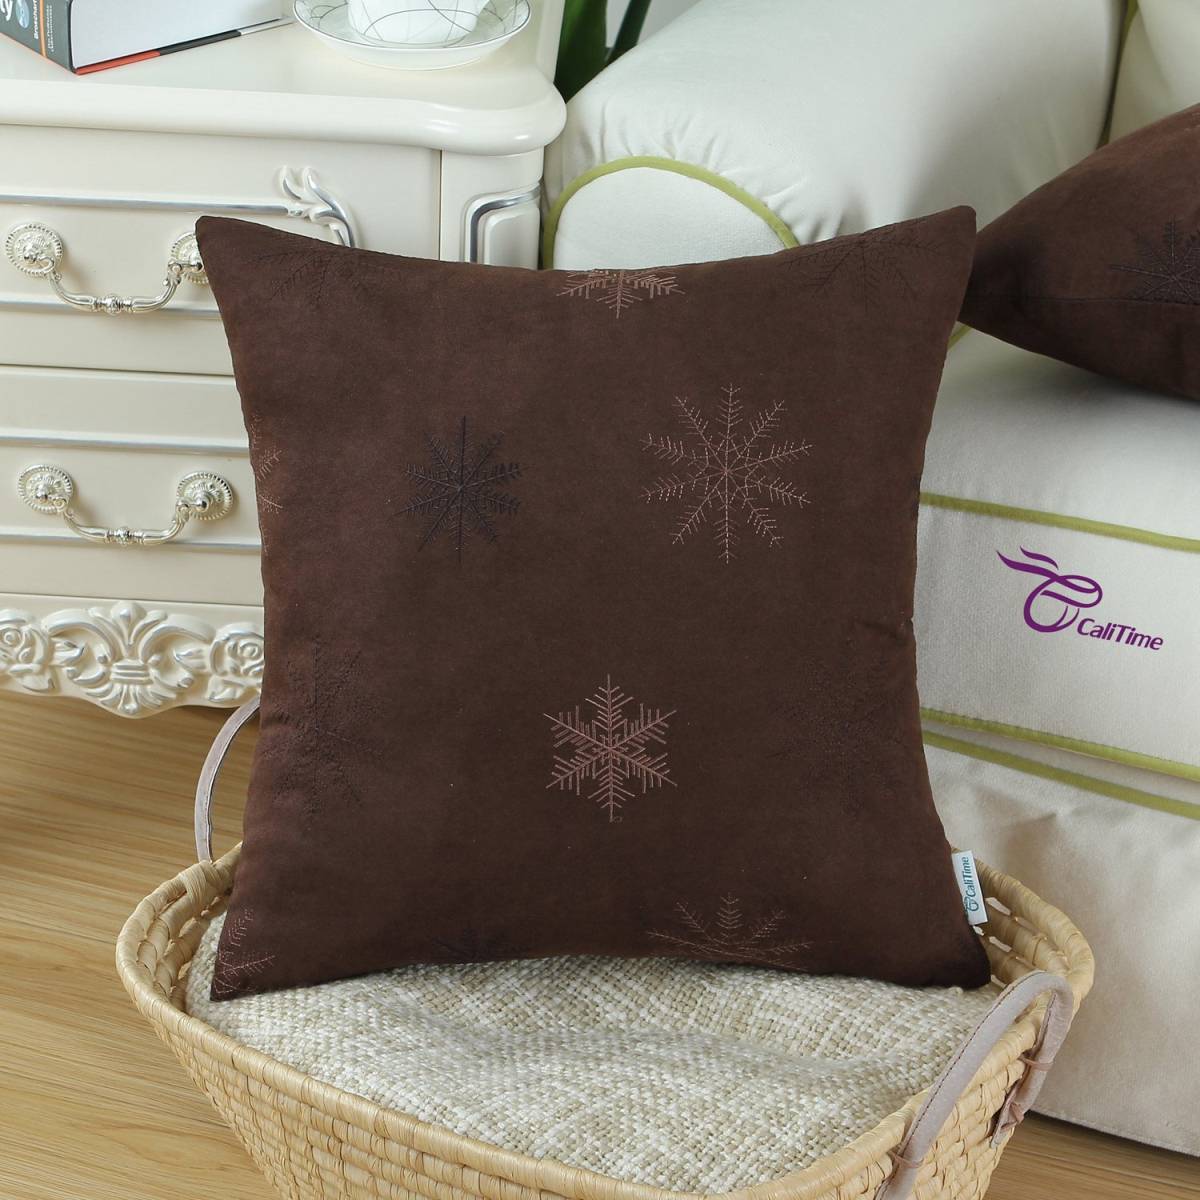 CaliTime Throw Pillows Covers 18 X 18 Inches